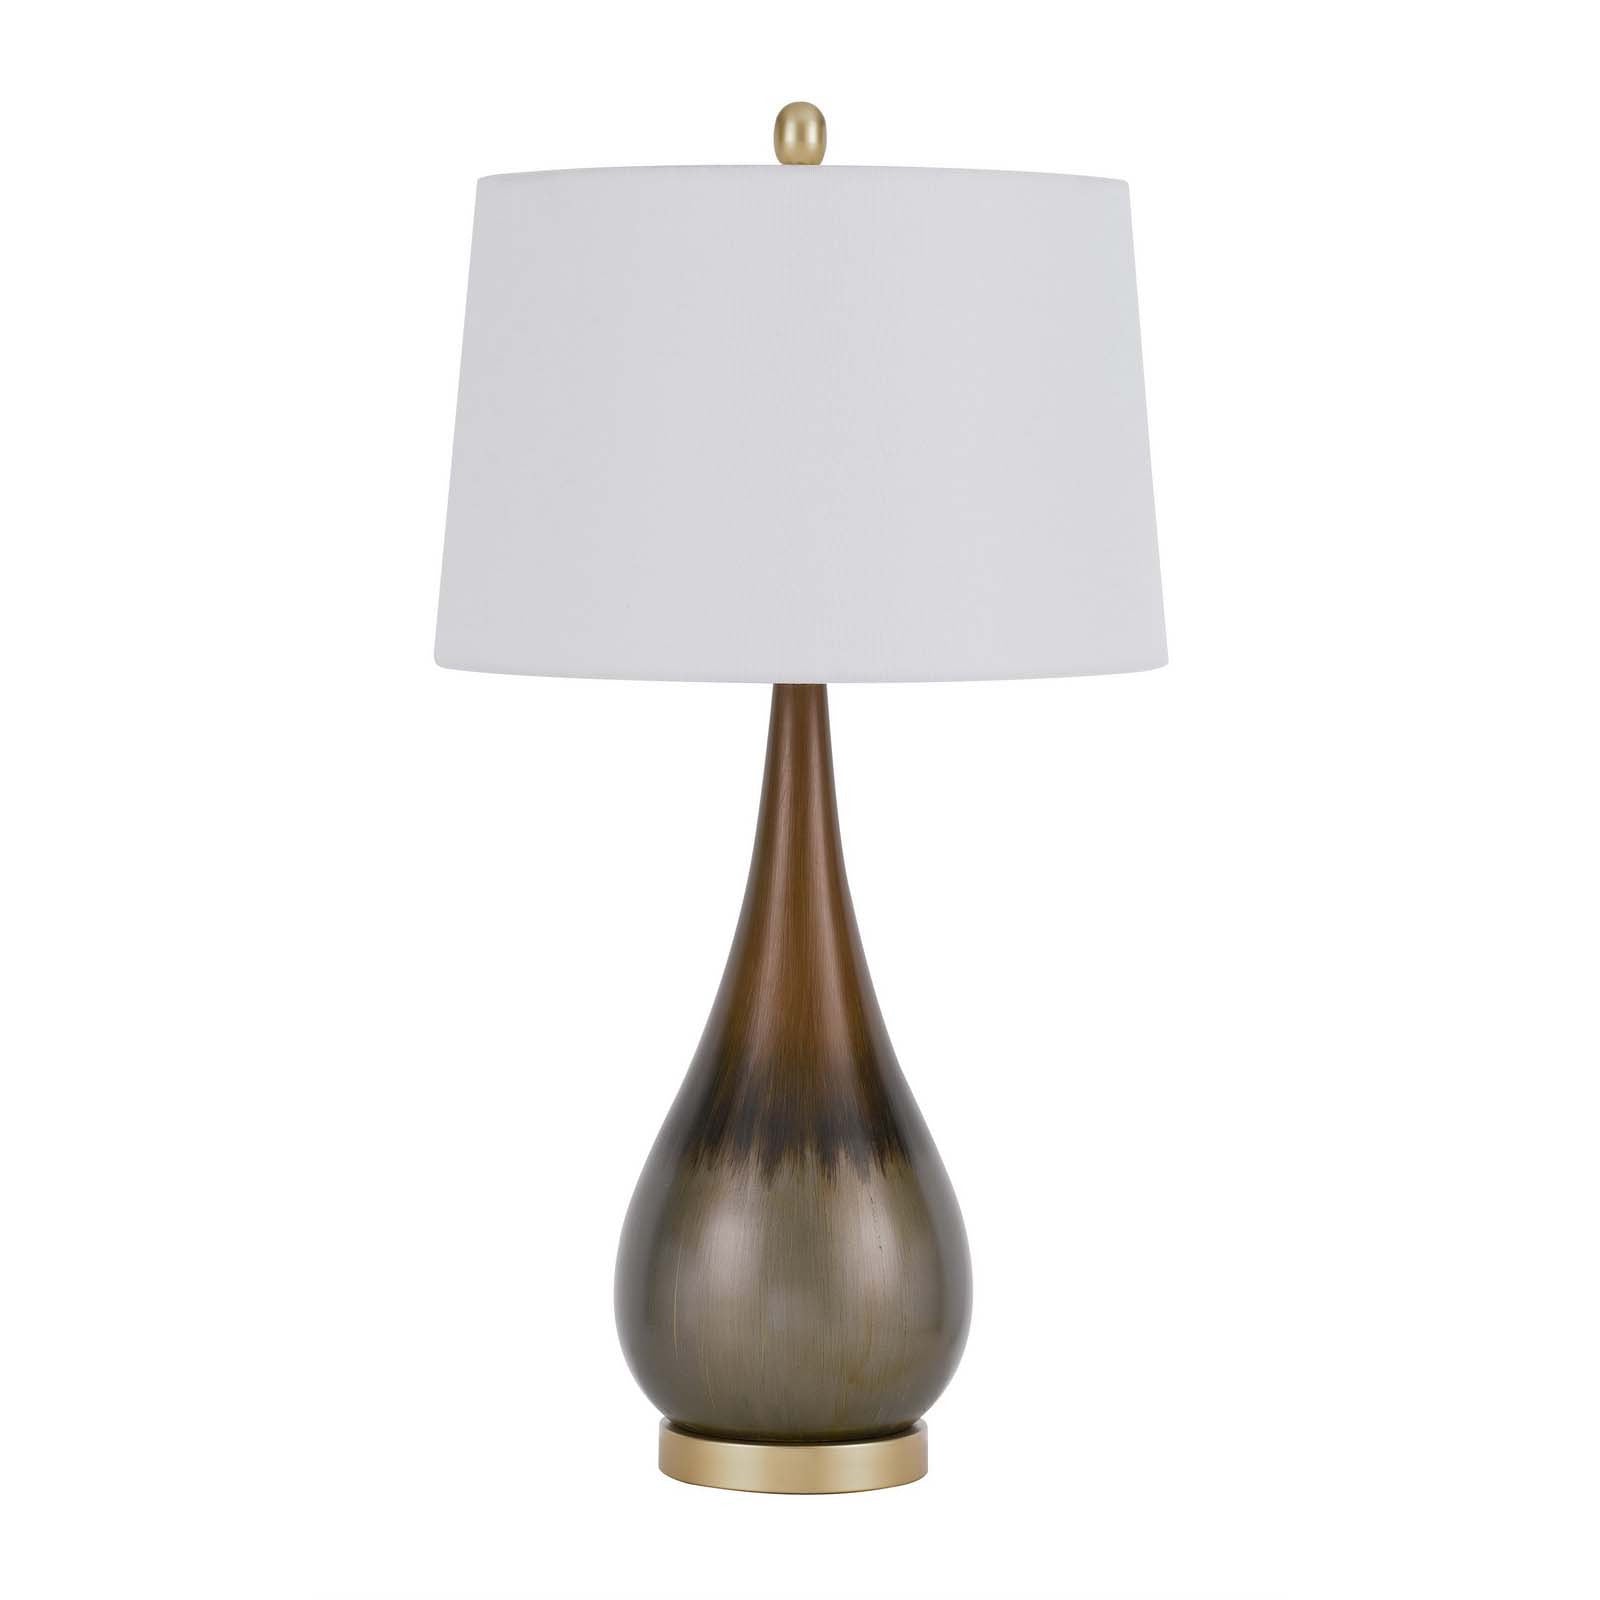 30" Taupe Metal Table Lamp With White Empire Shade